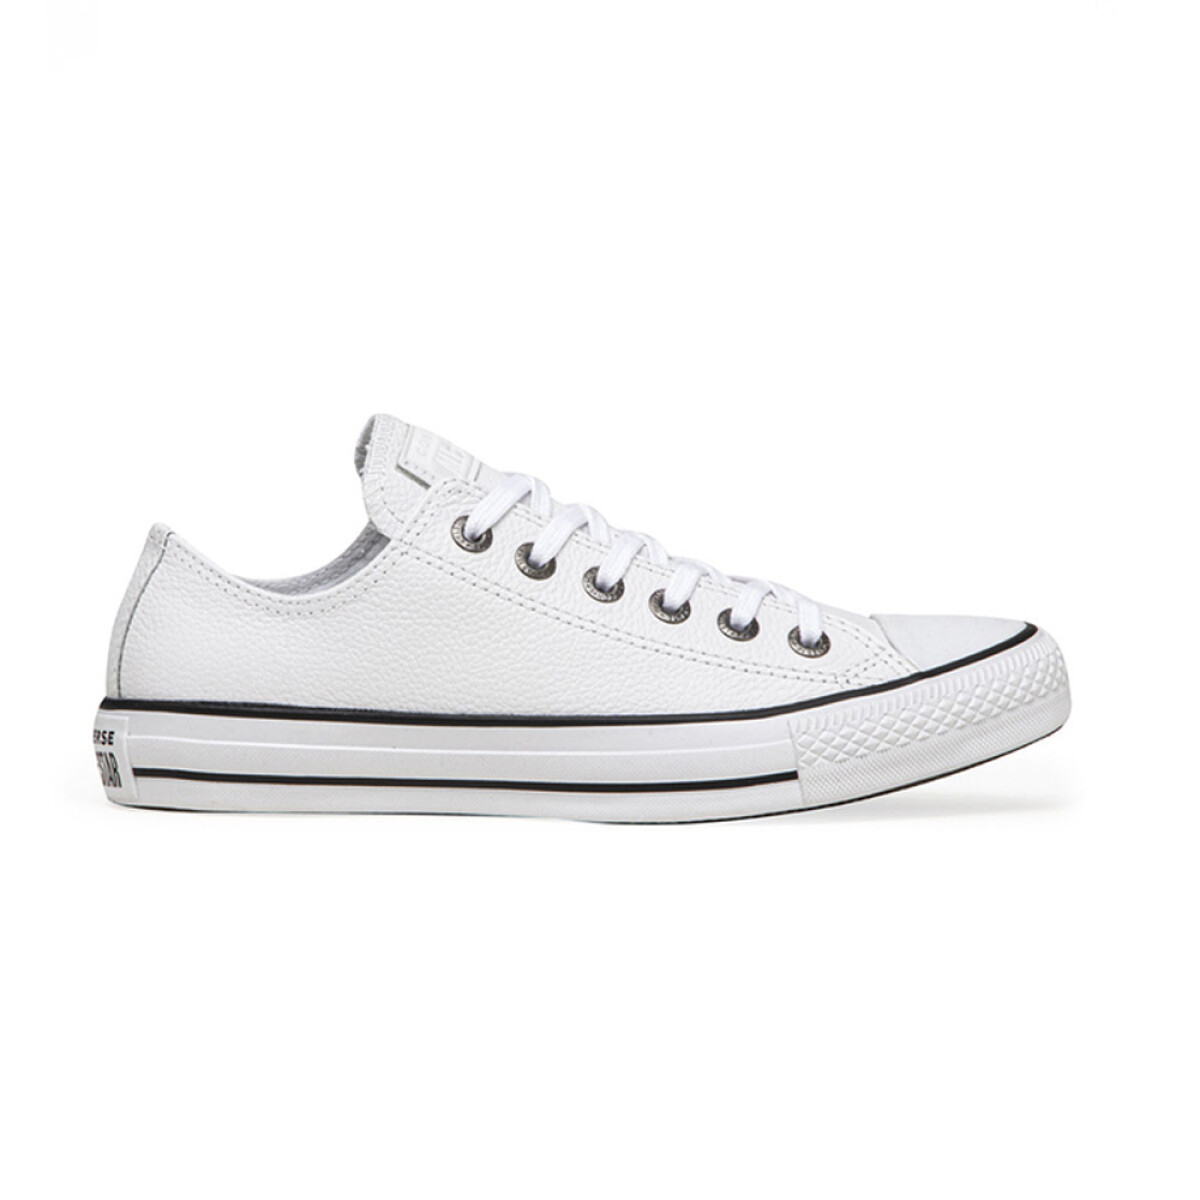 CONVERSE CHUCK TAYLOR ALL STAR LEATHER - White 